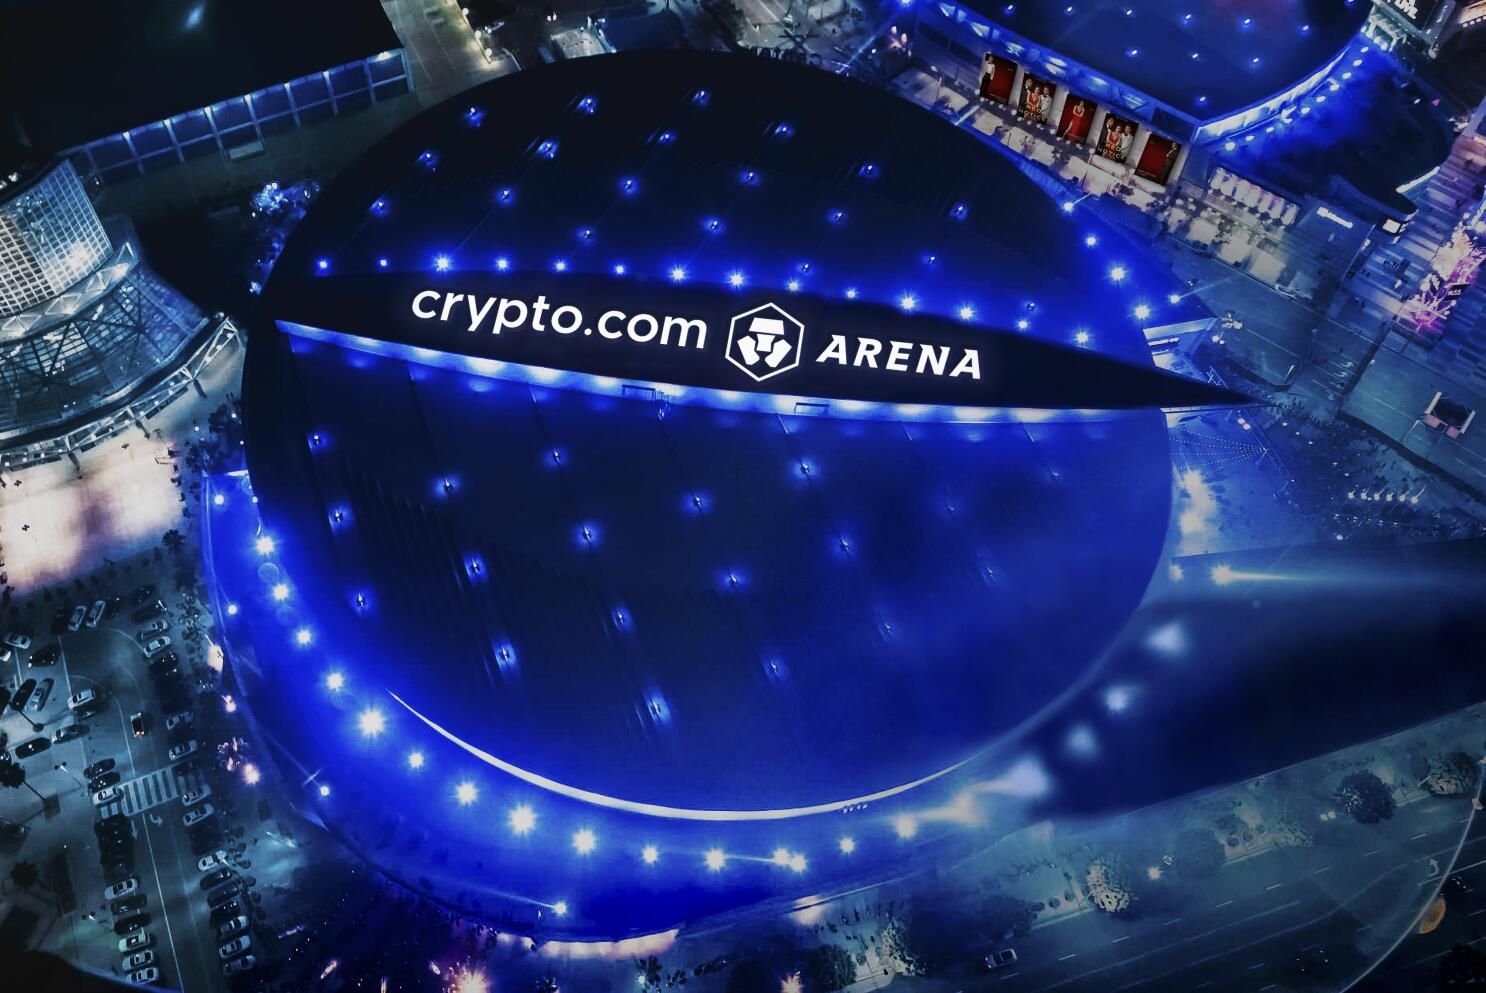 Staples Center officially becomes Crypto.com Arena as Lakers take